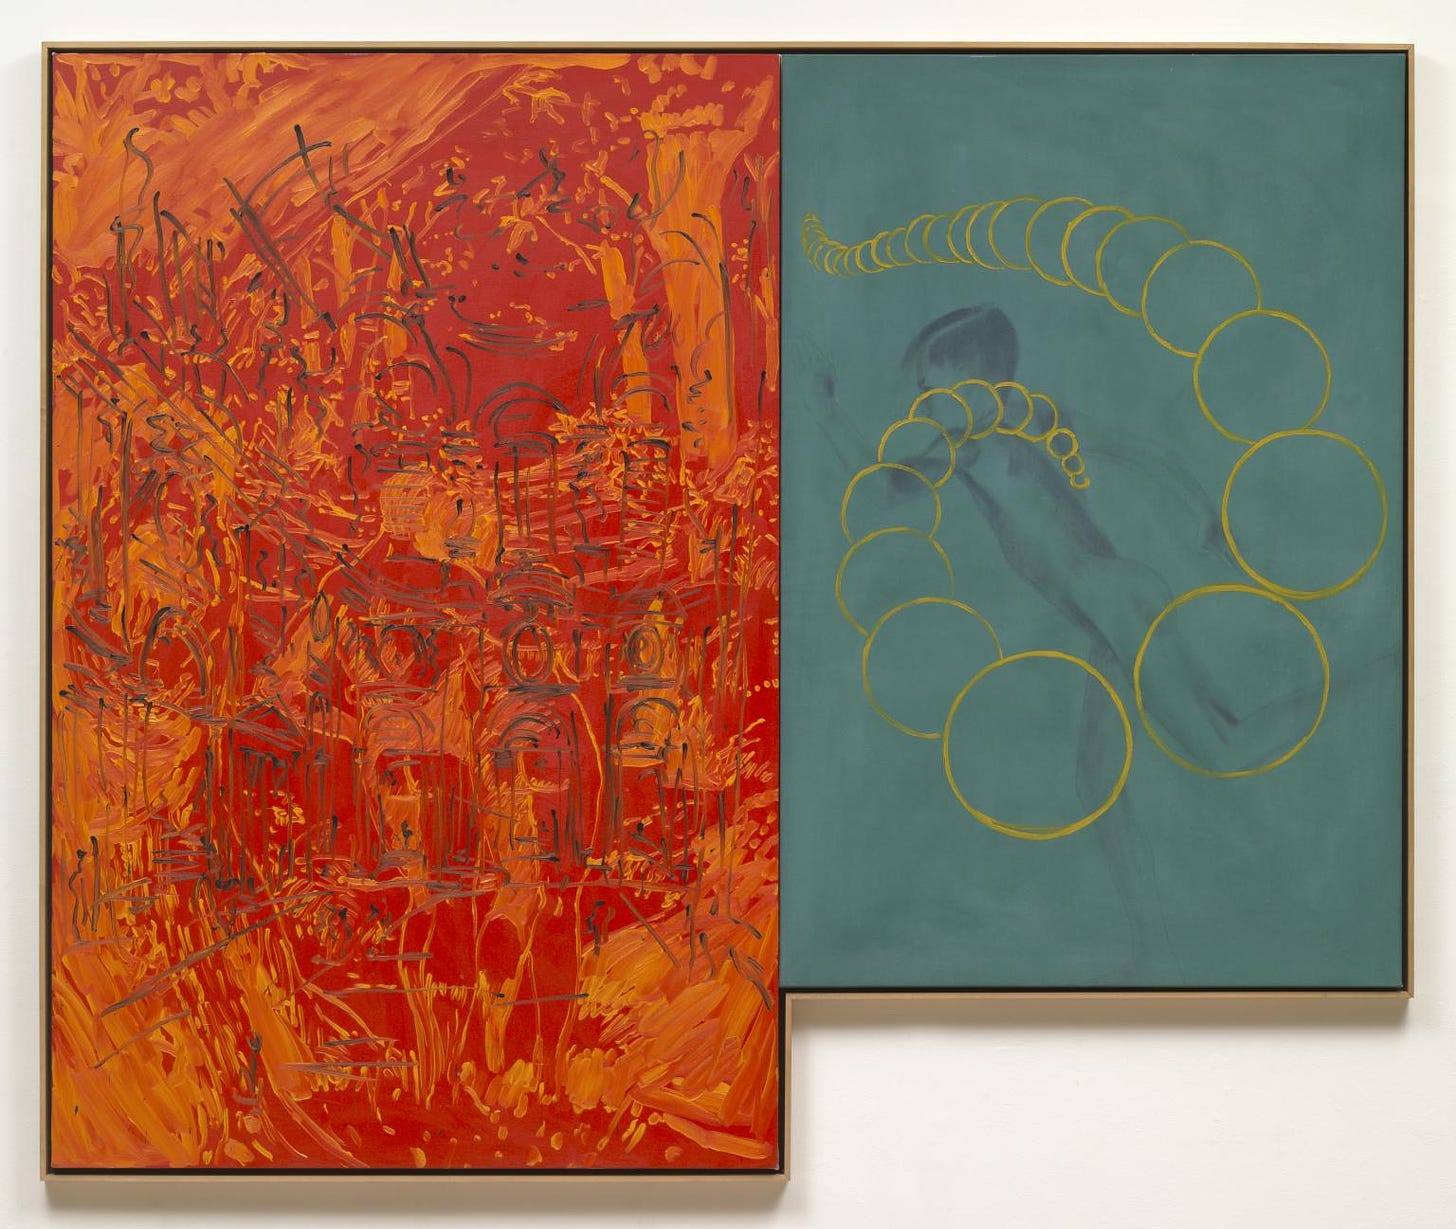 Calm Down in a Diary (Diptych)', David Salle, 1982 | Tate